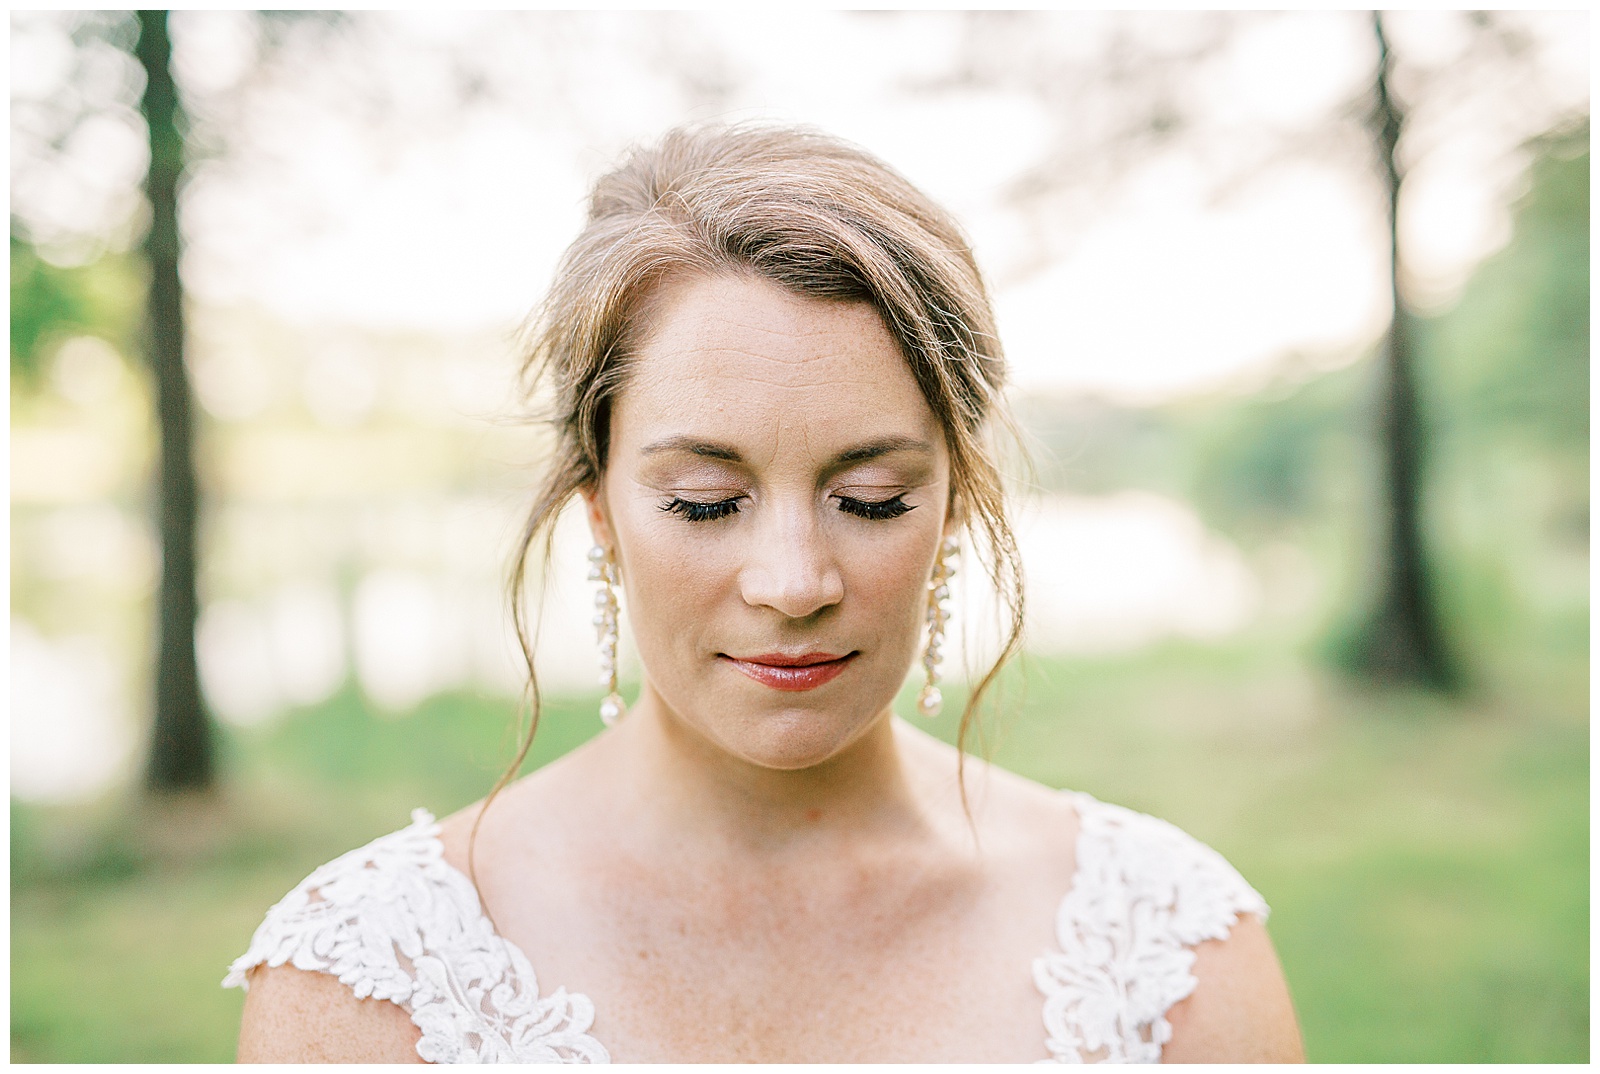 updo hair and makeup detail from sunset bridal portraits in woods and field